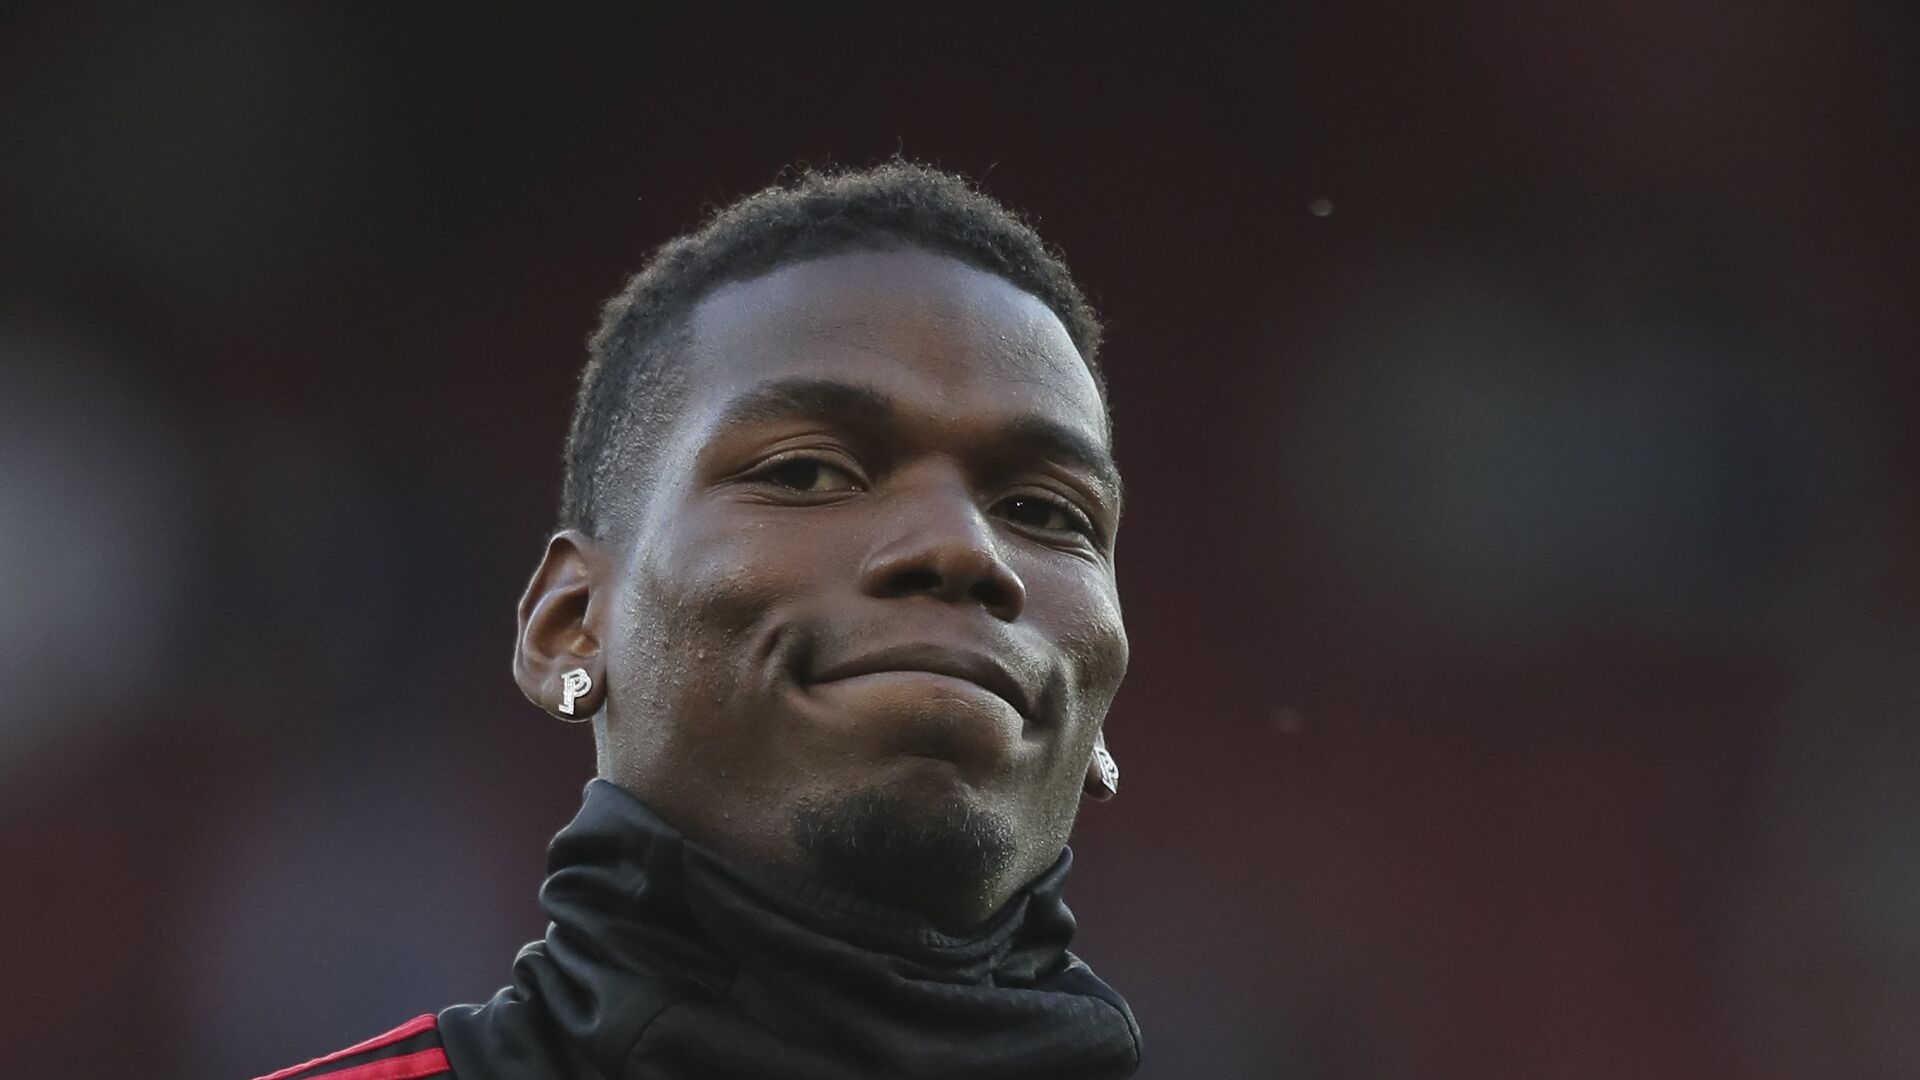 Manchester United's Paul Pogba applauds the fans as he takes part in the warm up prior to the start of the English Premier League soccer match between Manchester United and Leicester City at Old Trafford, in Manchester, England, Friday, Aug. 10, 2018 - اسپوتنیک افغانستان  , 1920, 27.11.2021